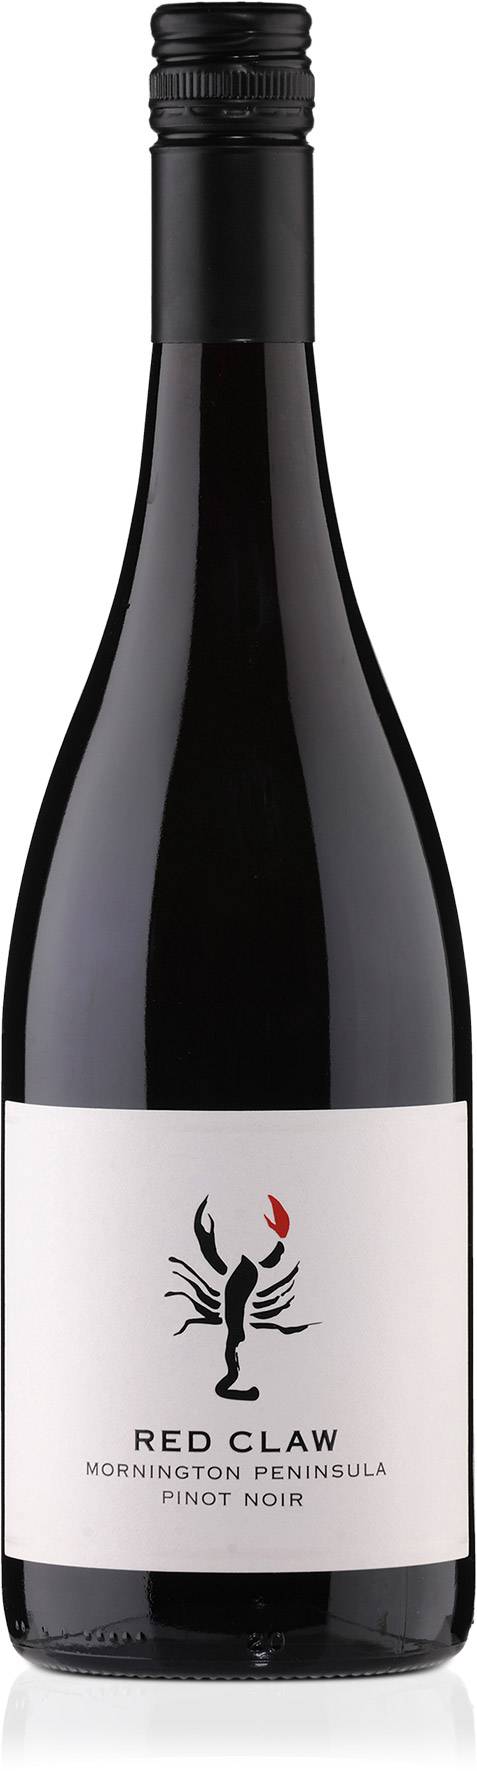 Red Claw Pinot Noir 750ml